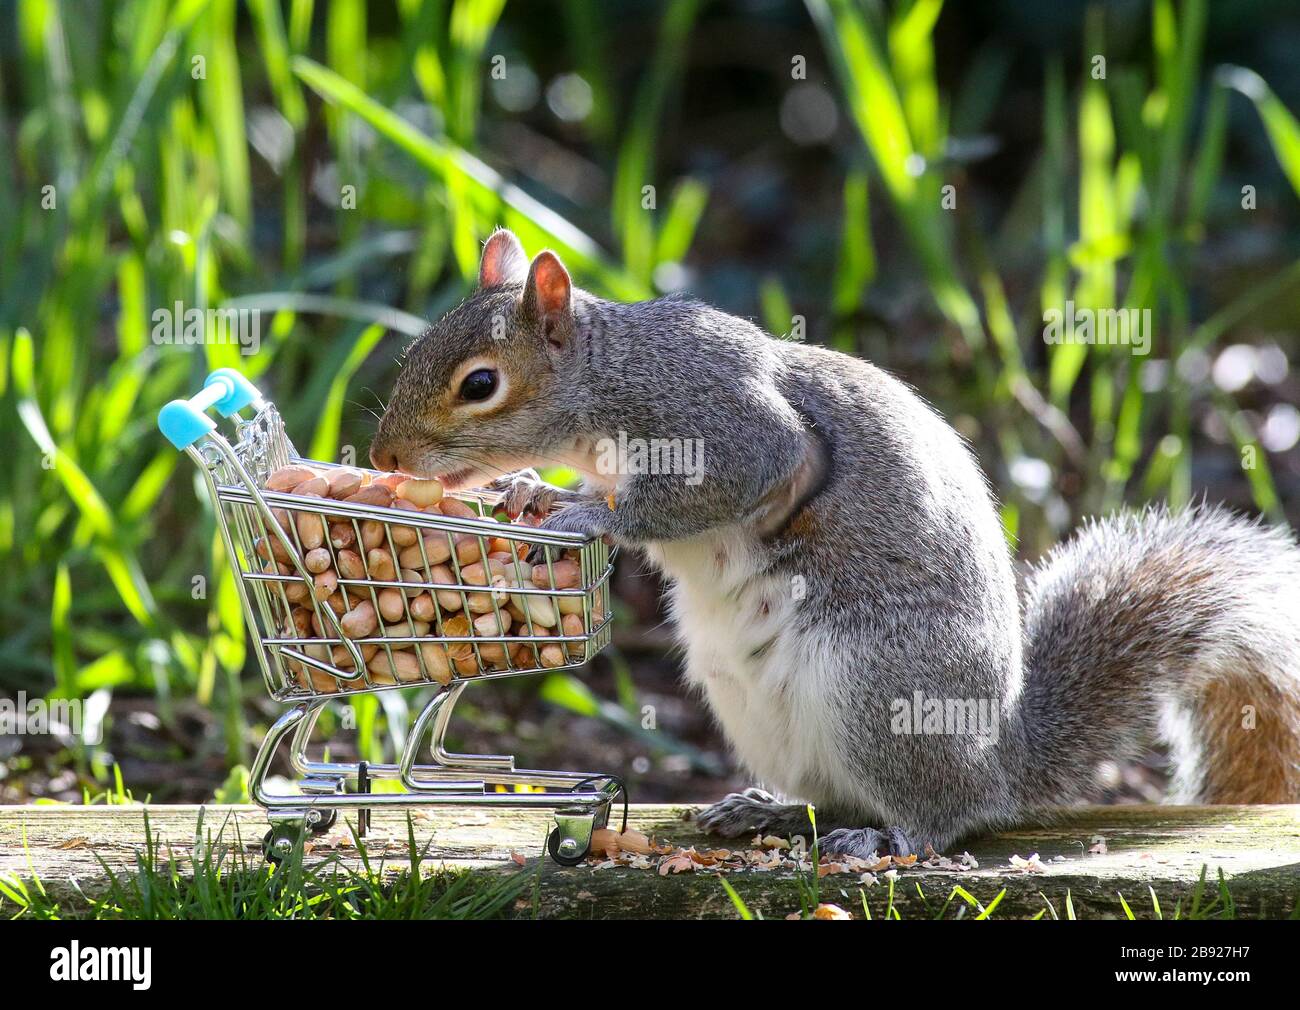 Southampton, Hampshire. 23rd March 2020. UK Weather: A Squirrel stockpiling nuts in a sunny back garden. Stock Photo